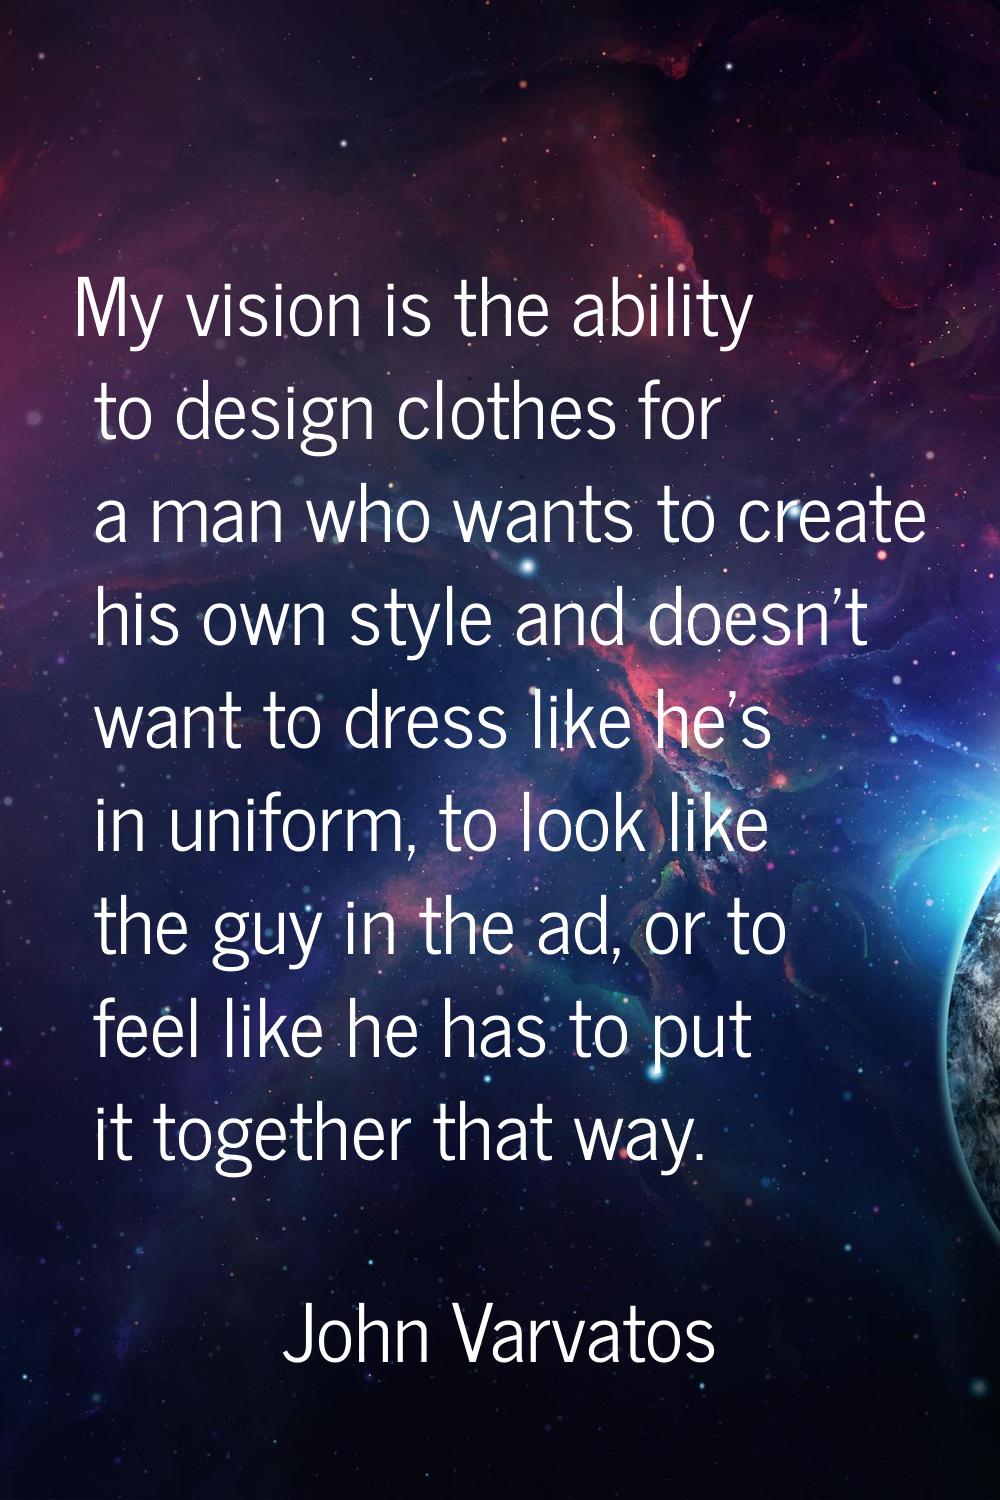 My vision is the ability to design clothes for a man who wants to create his own style and doesn't 